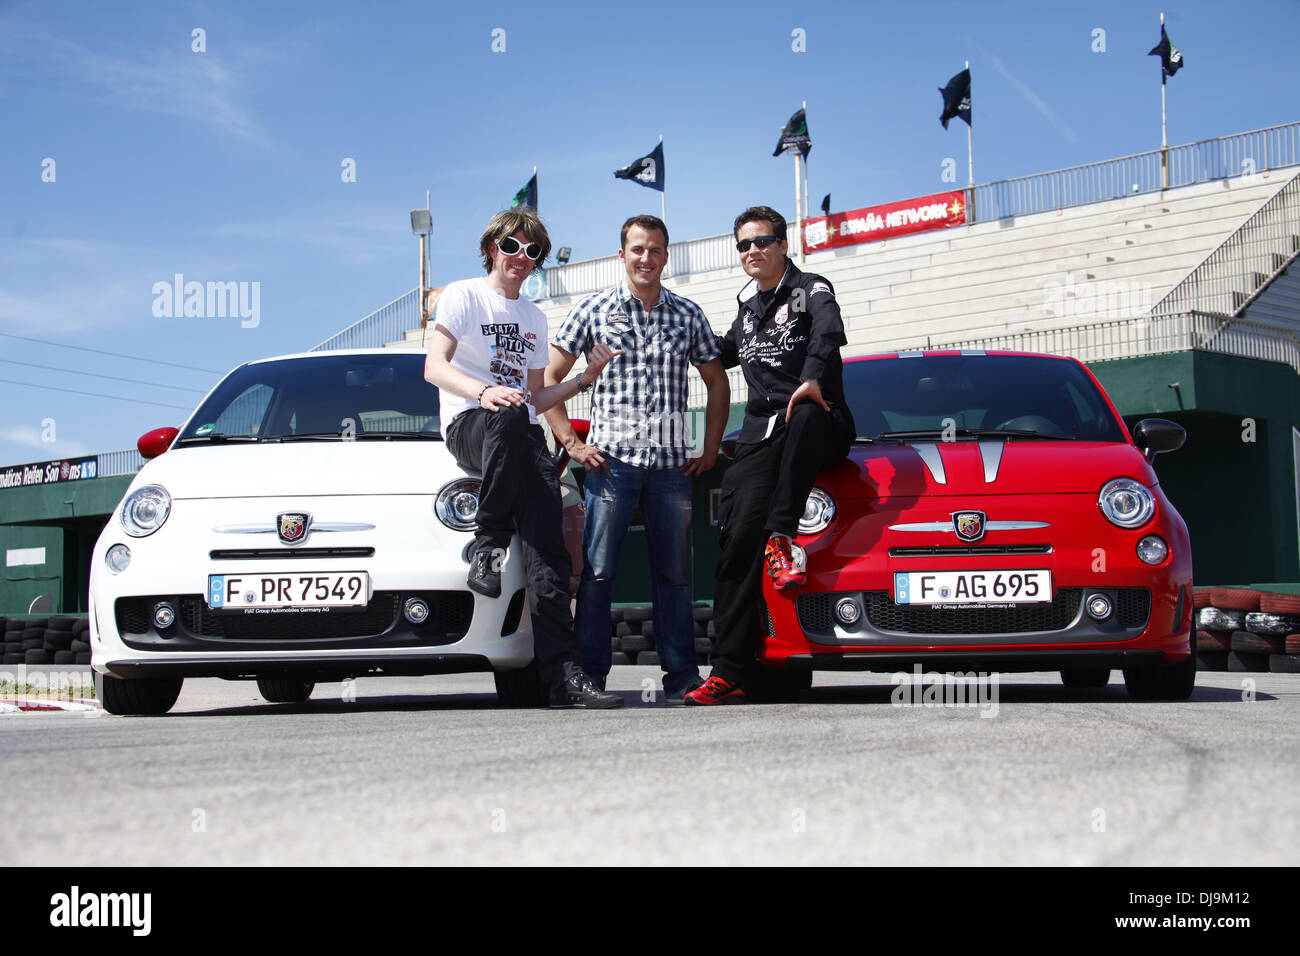 Lance David Arnold, Mickie Krause and Andy Bar filming a car race for German VOX TV show 'Promis am Limit' at Circuito Mallorca race track near El Arenal. Before the race, racing driver Lance David Arnold gives Krause and Bar an introduction into race dri Stock Photo